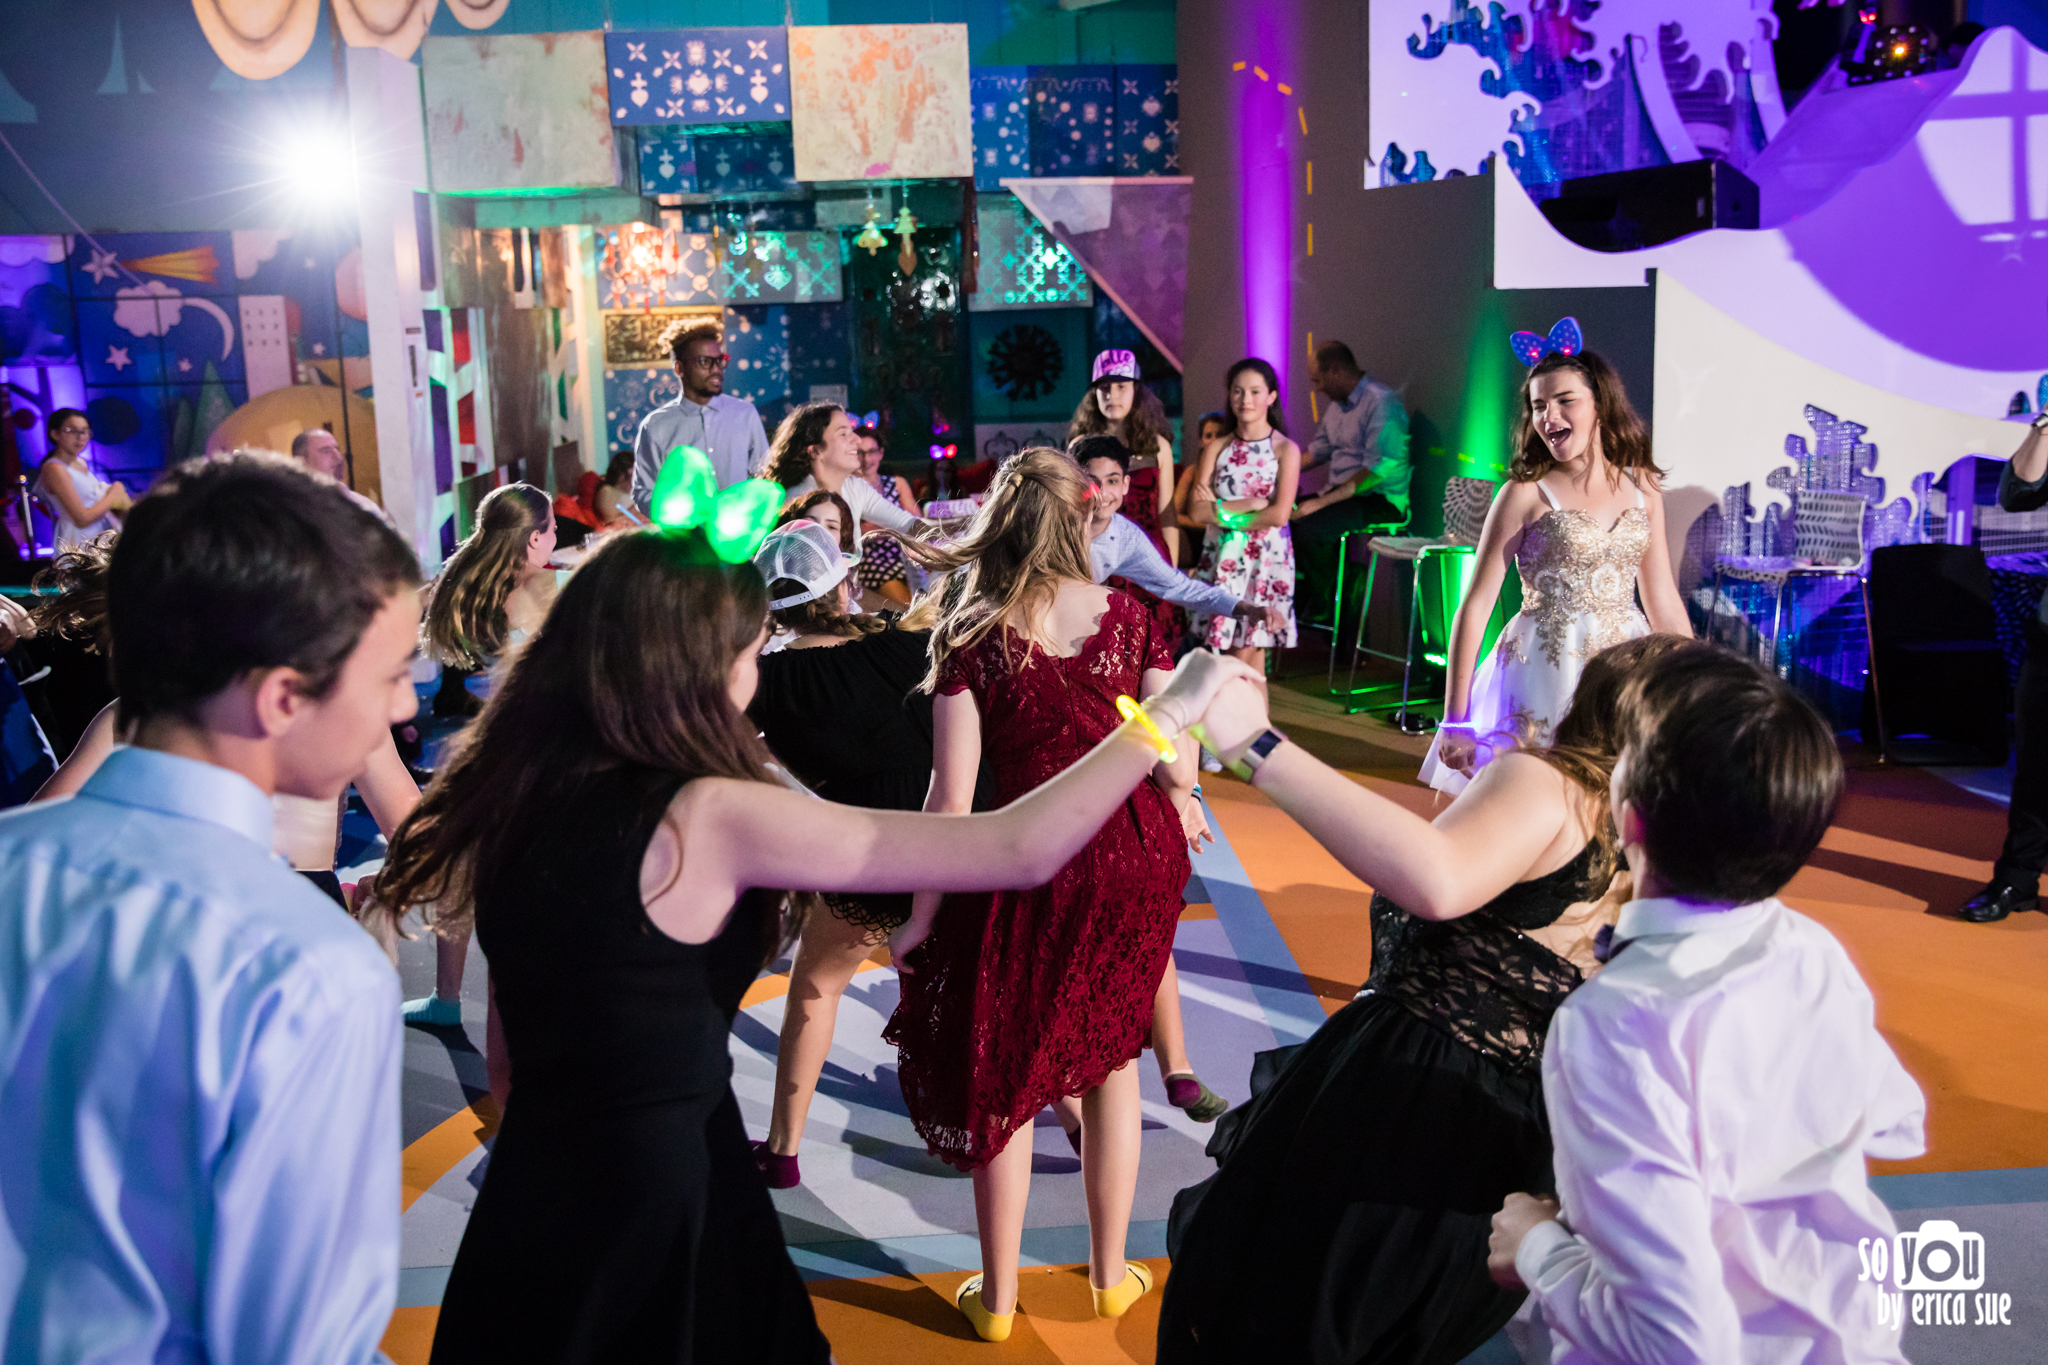 so-you-by-erica-sue-bar-bat-mitzvah-young-at-art-davie-fl-photography-5801.jpg